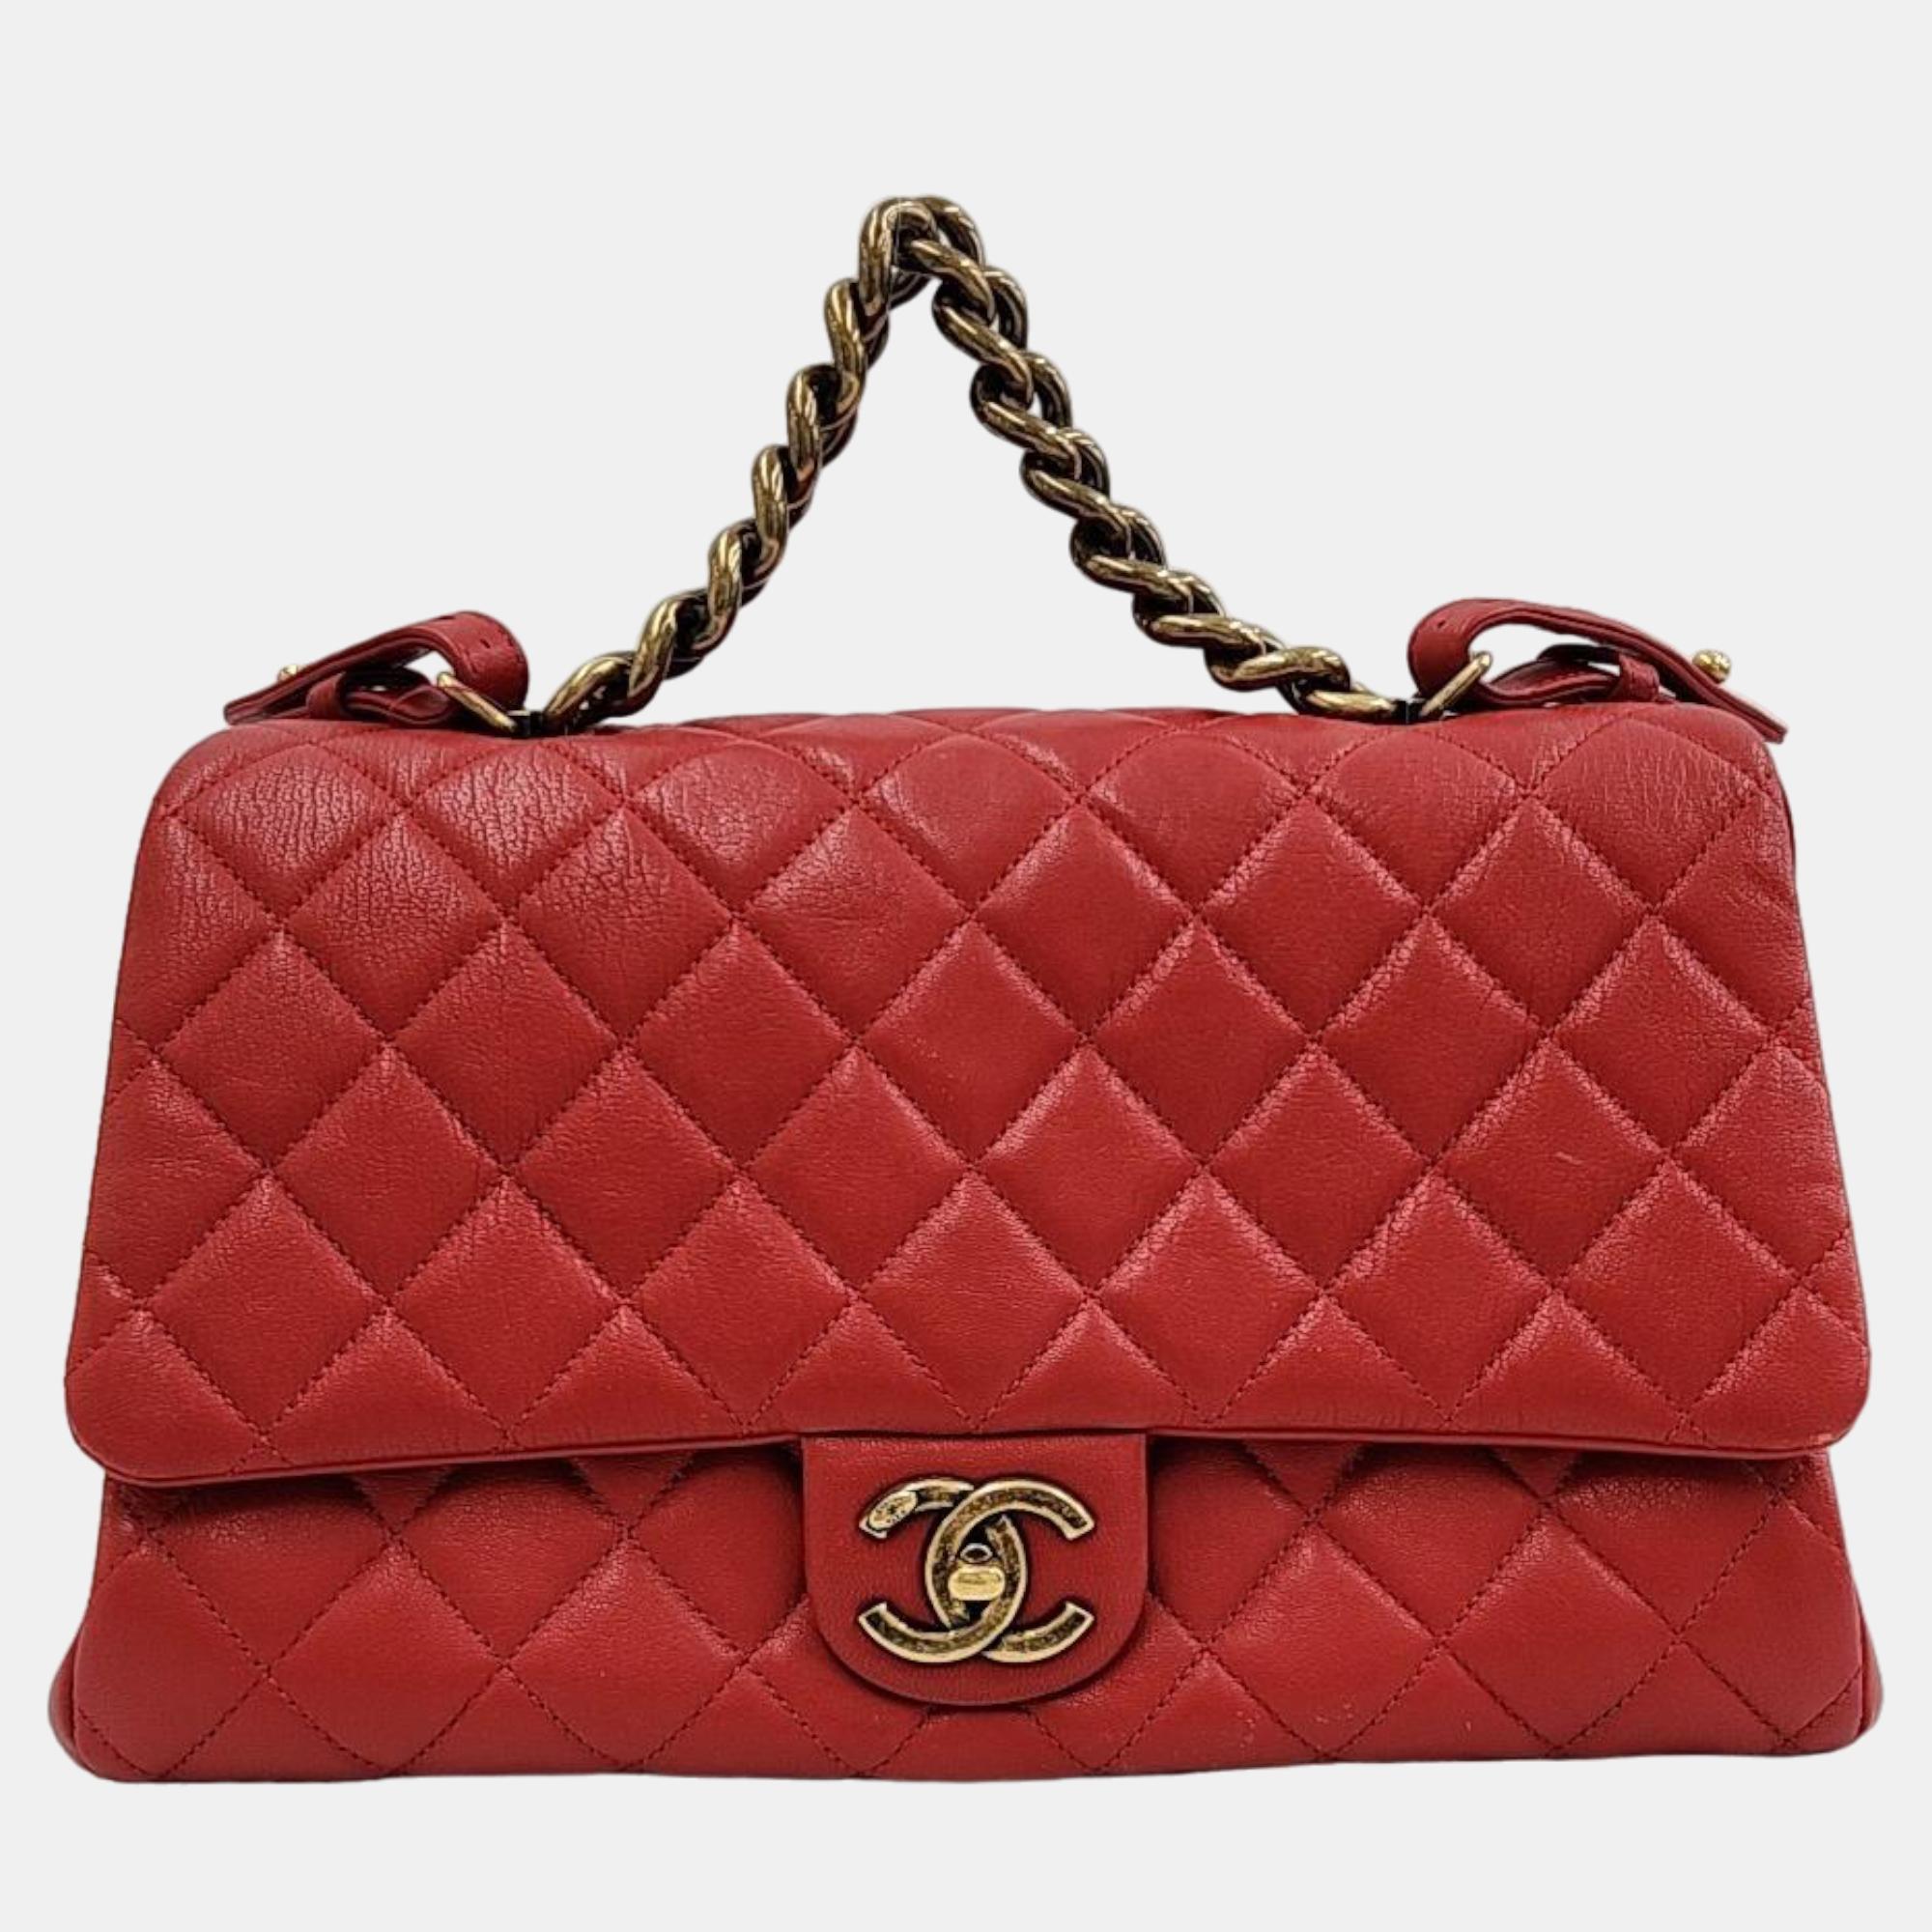 Pre-owned Chanel Red Leather Paris-rome Large Trapezio Flap Bag